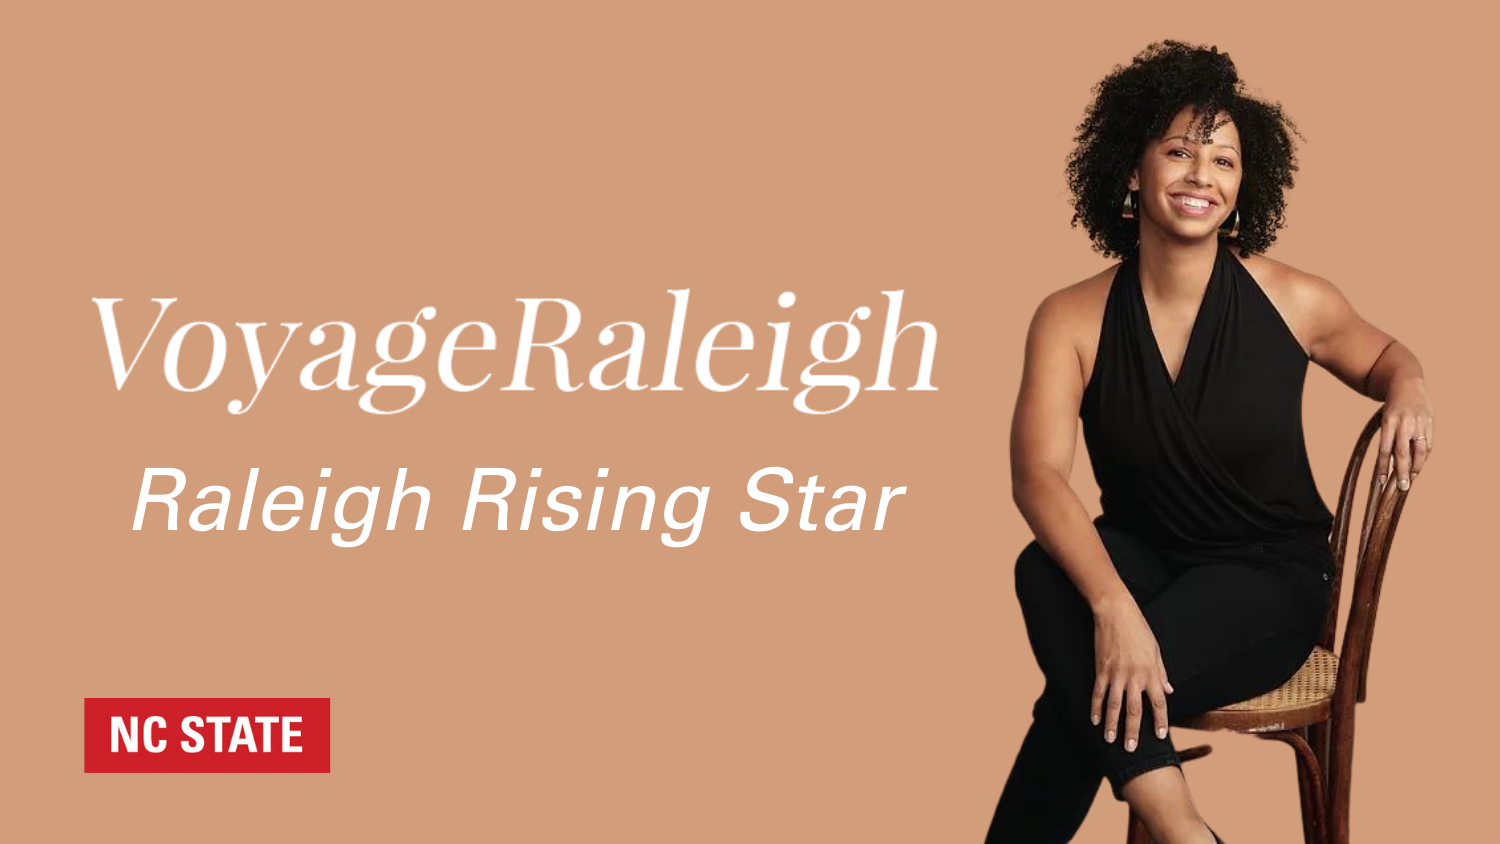 Voyage Raleigh Features Jessica Yinka Thomas in Rising Stars Series